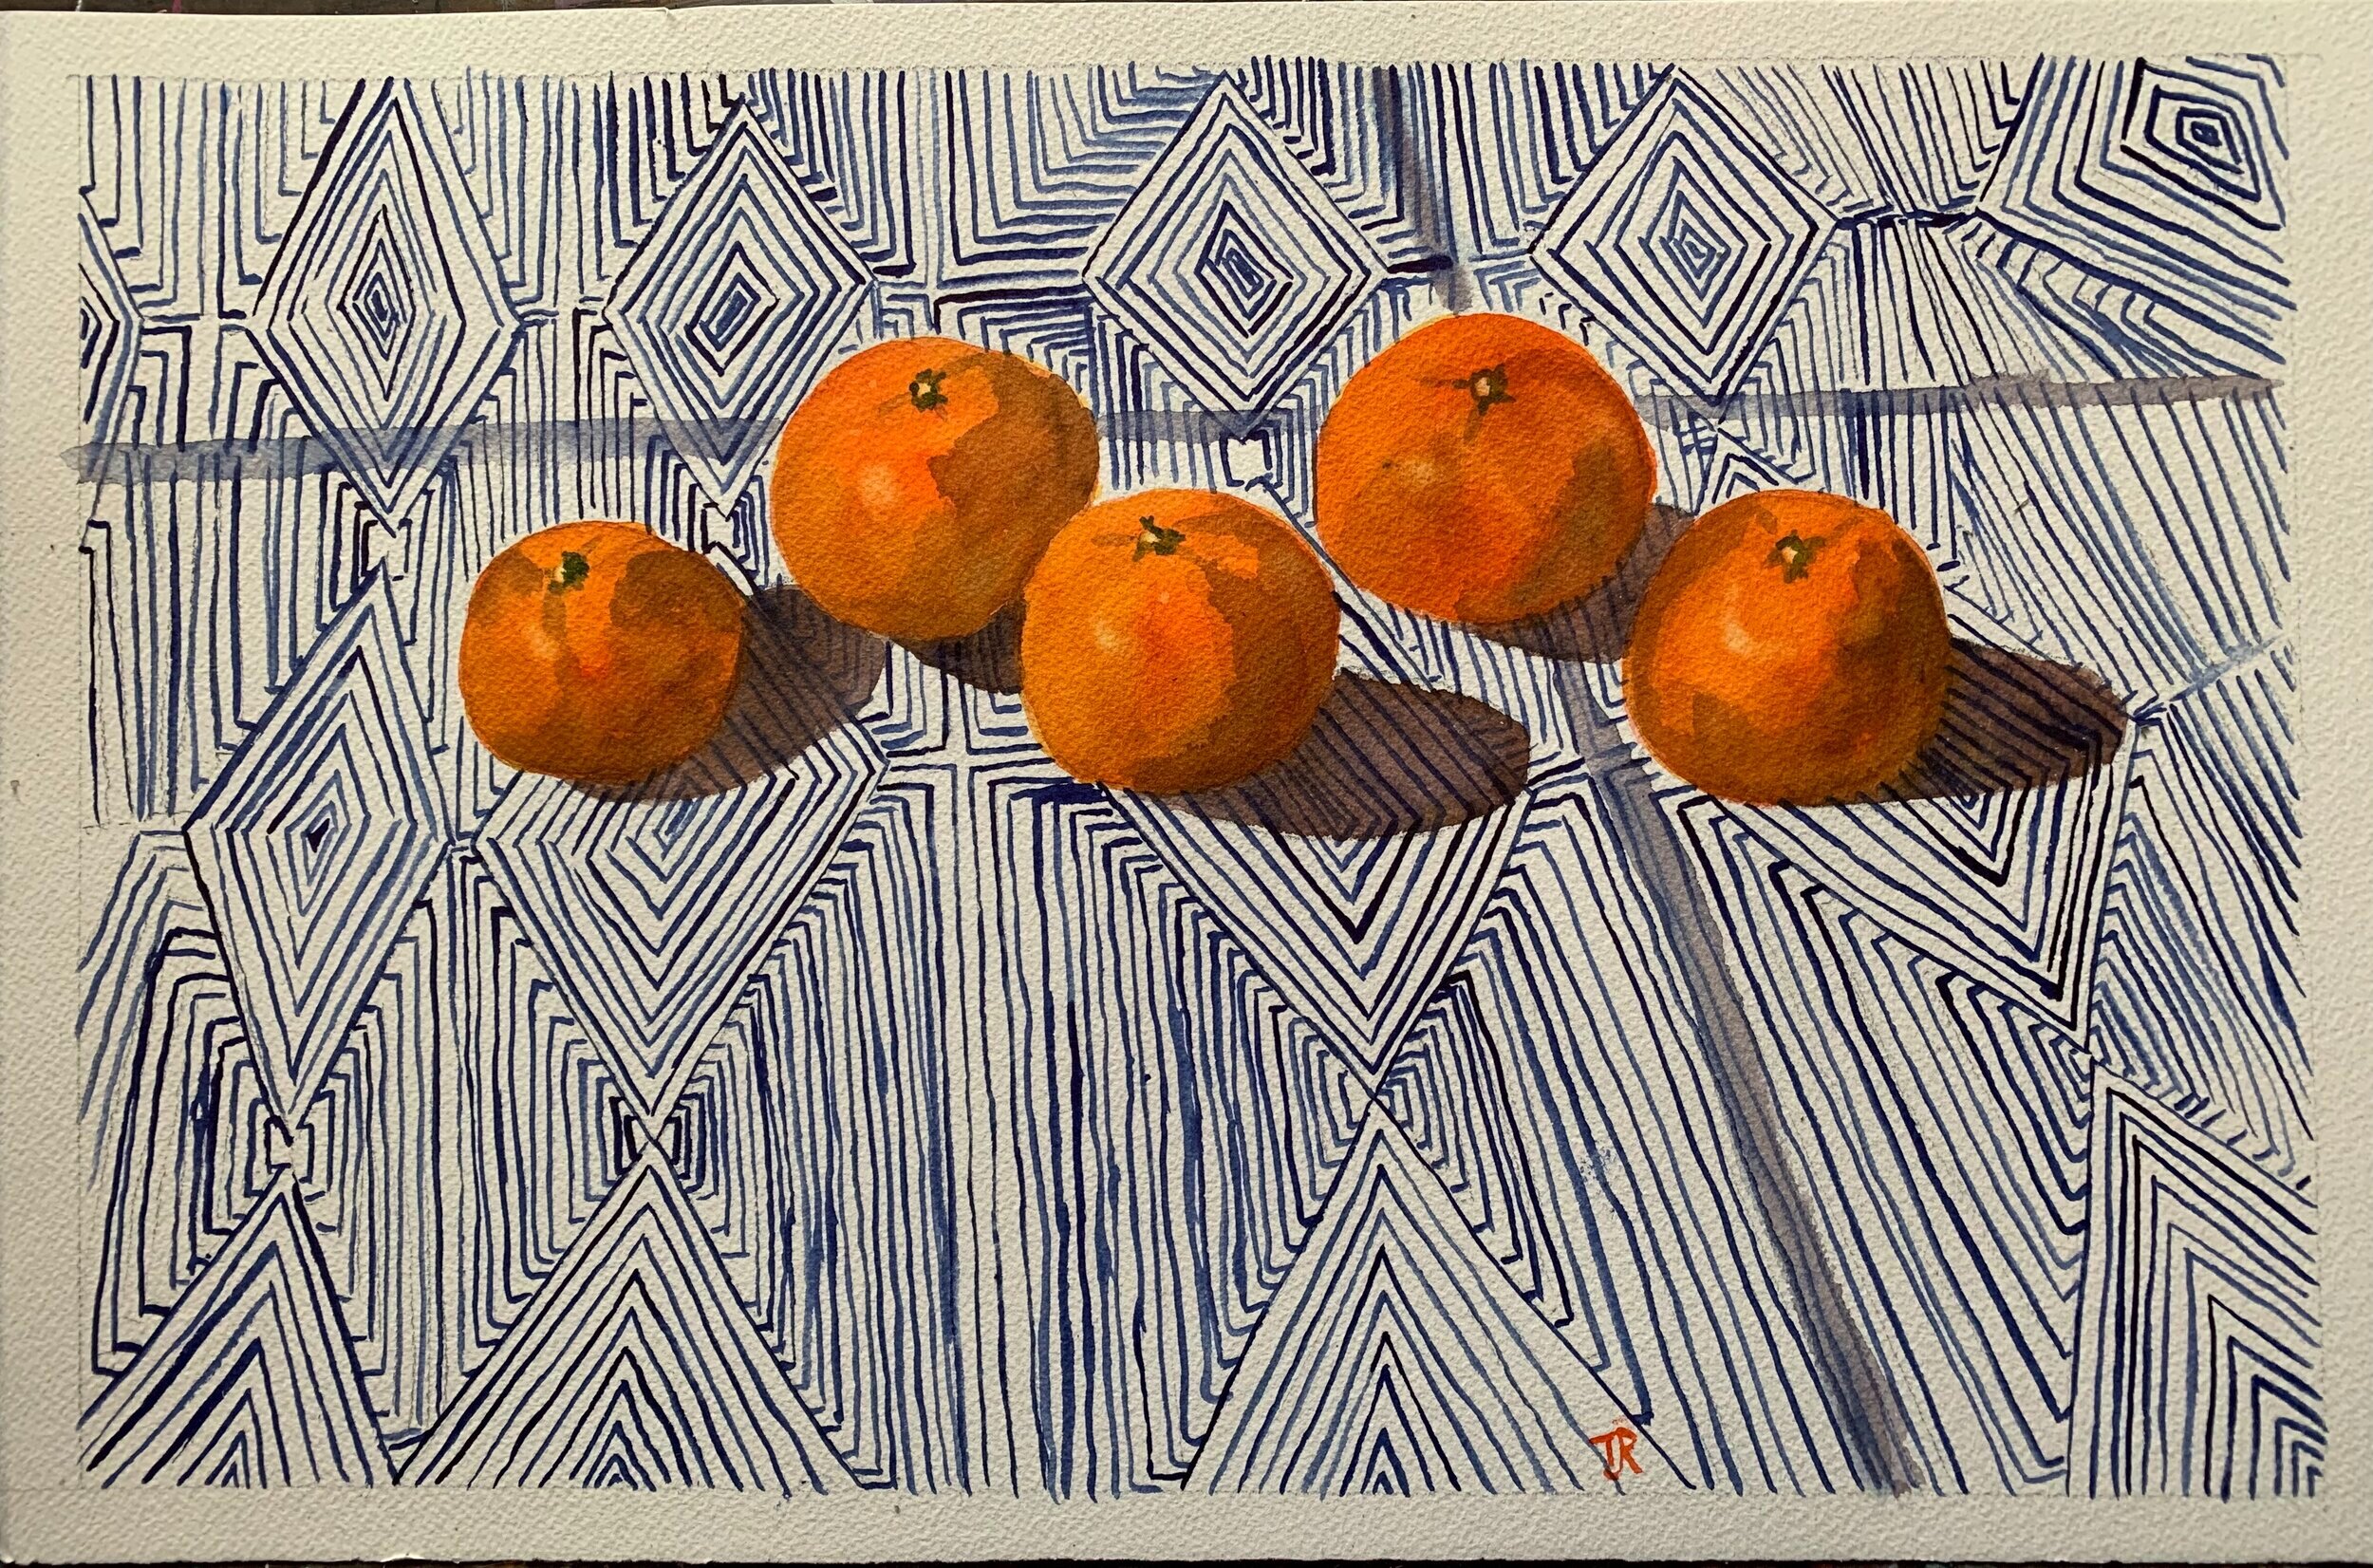 Vitamin C during the pandemic 11" X 17" $425